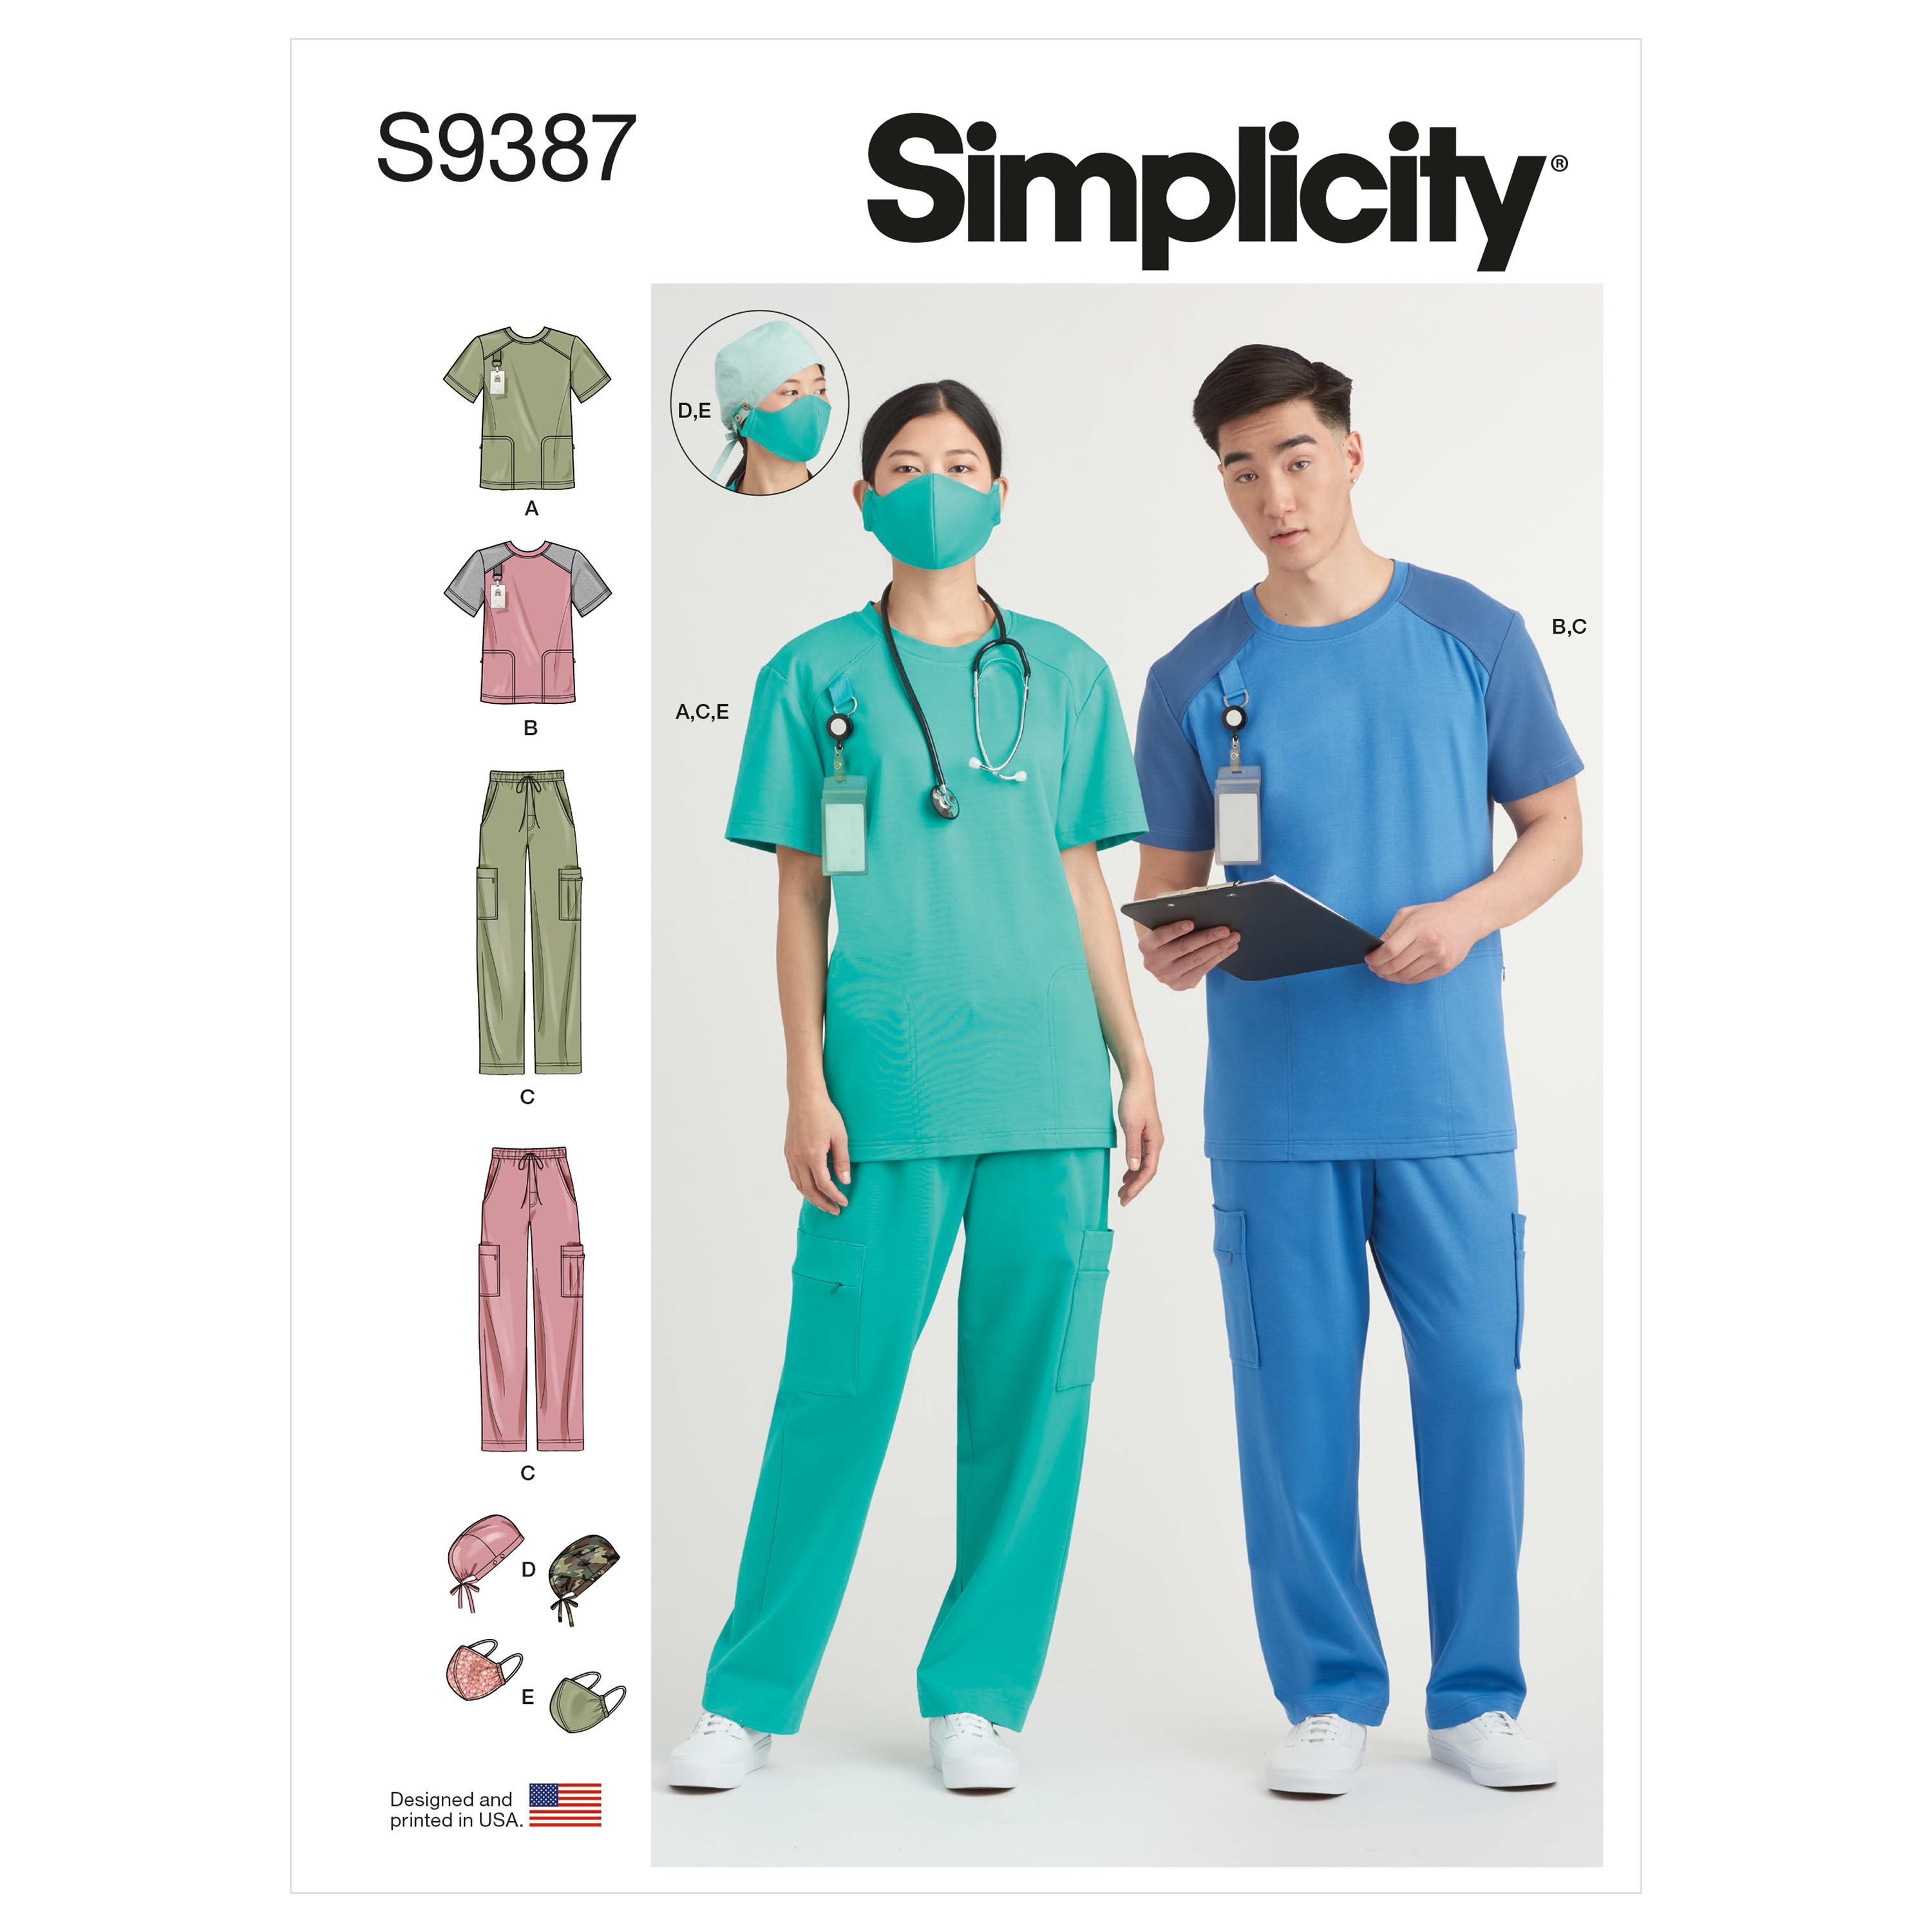 Simplicity Sewing Pattern S9387 Unisex Knit Scrub Tops, Pants, Cap and Mask